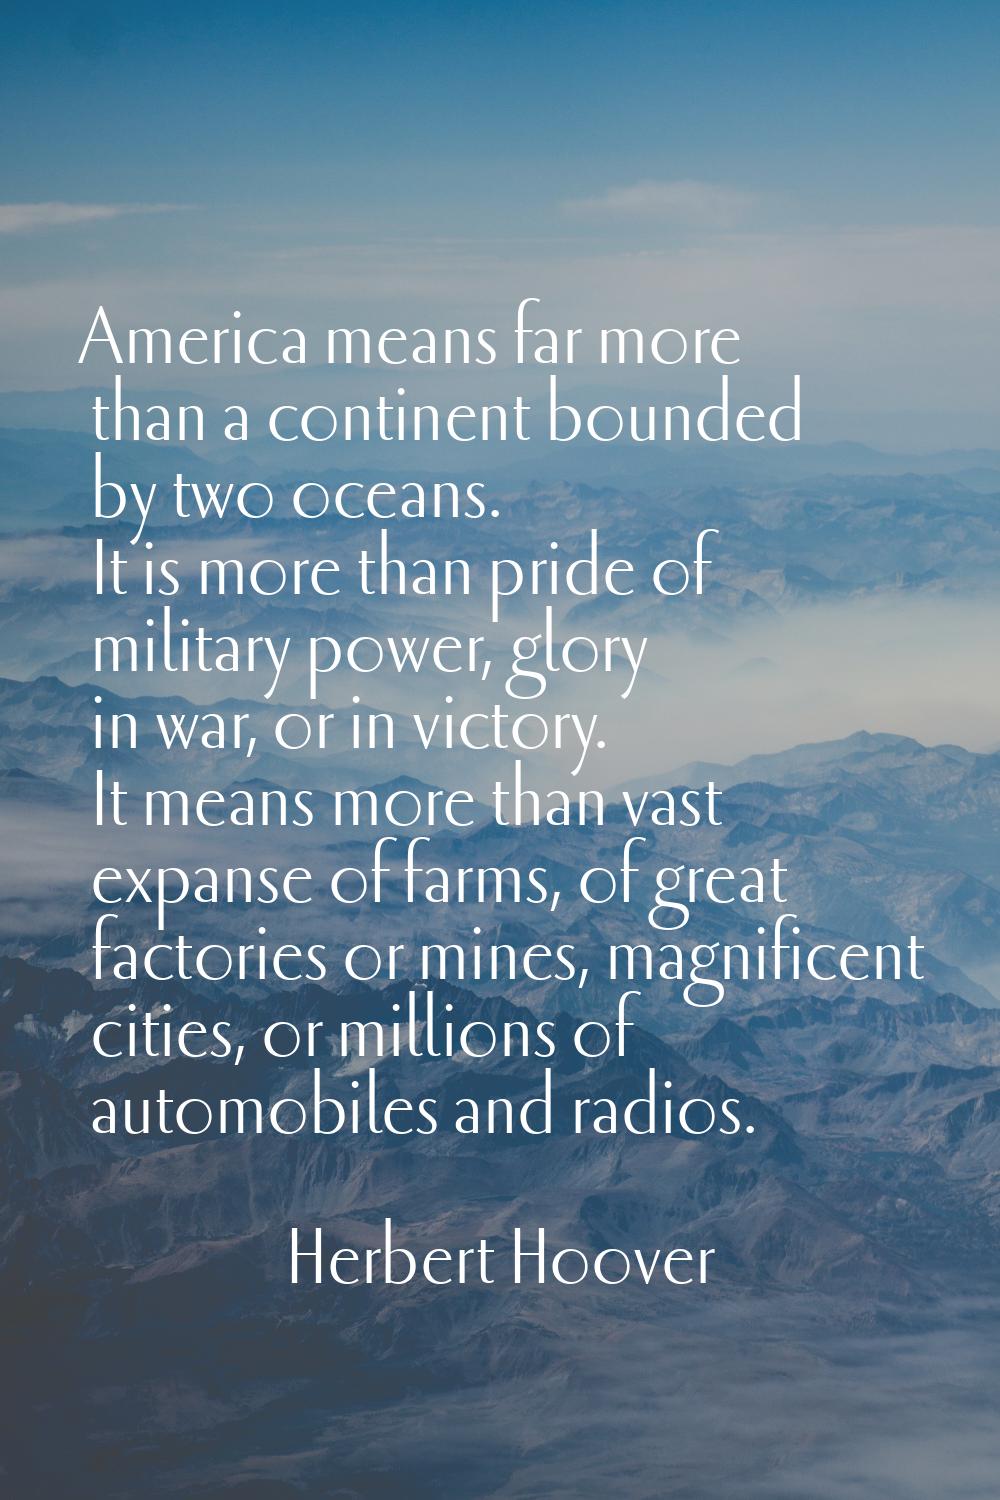 America means far more than a continent bounded by two oceans. It is more than pride of military po